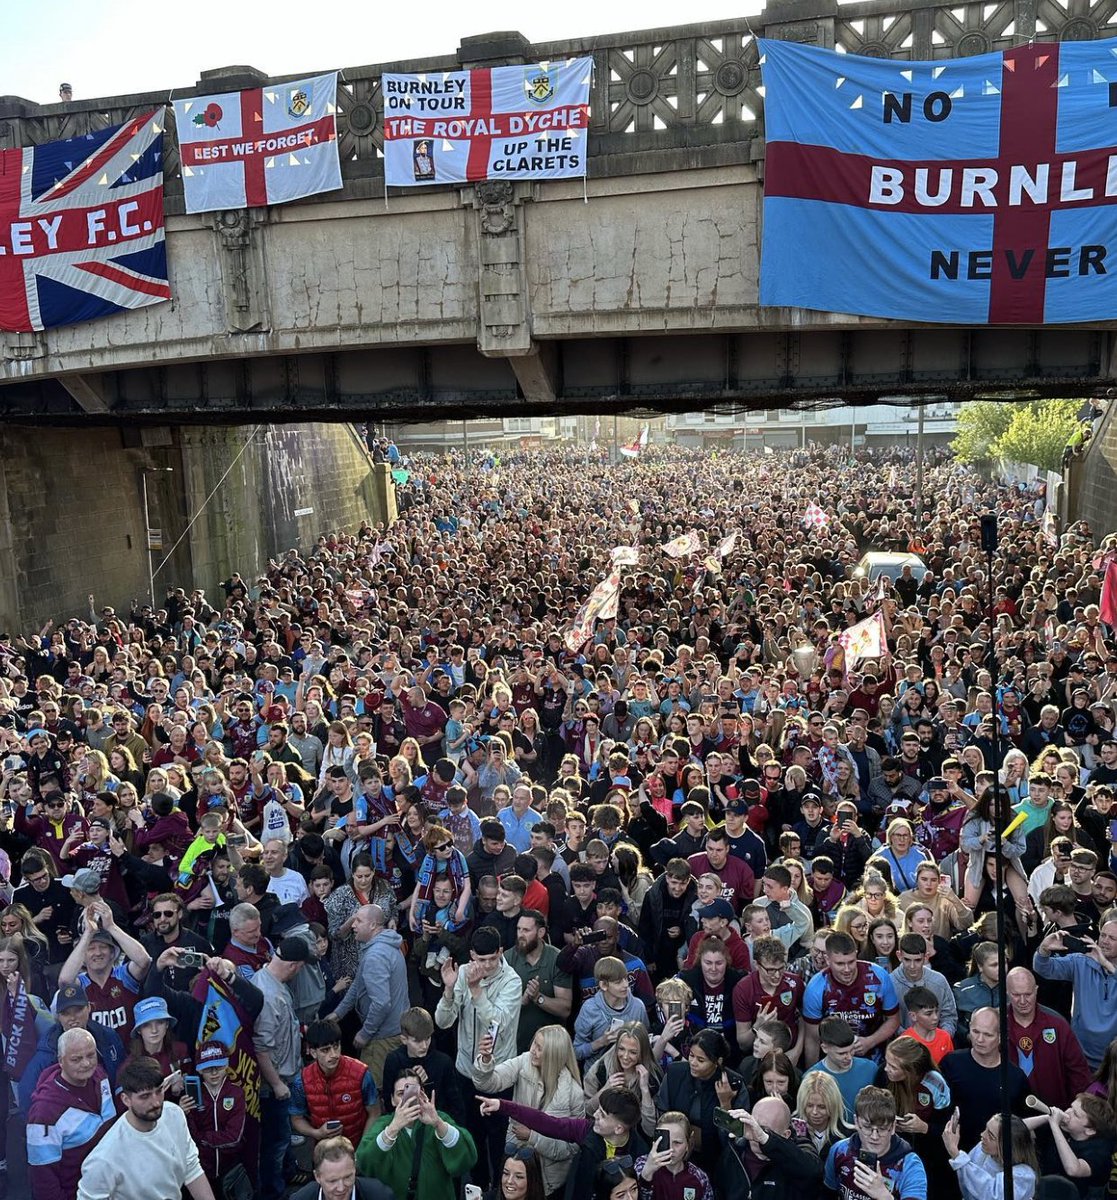 One year ago today, Burnley was a sea of Claret and Blue as thousands of you joined us for the Champions Parade 🚌❤️ Share your memories with us from that special day - here are @JJWatt and @KealiaOhai's 📸